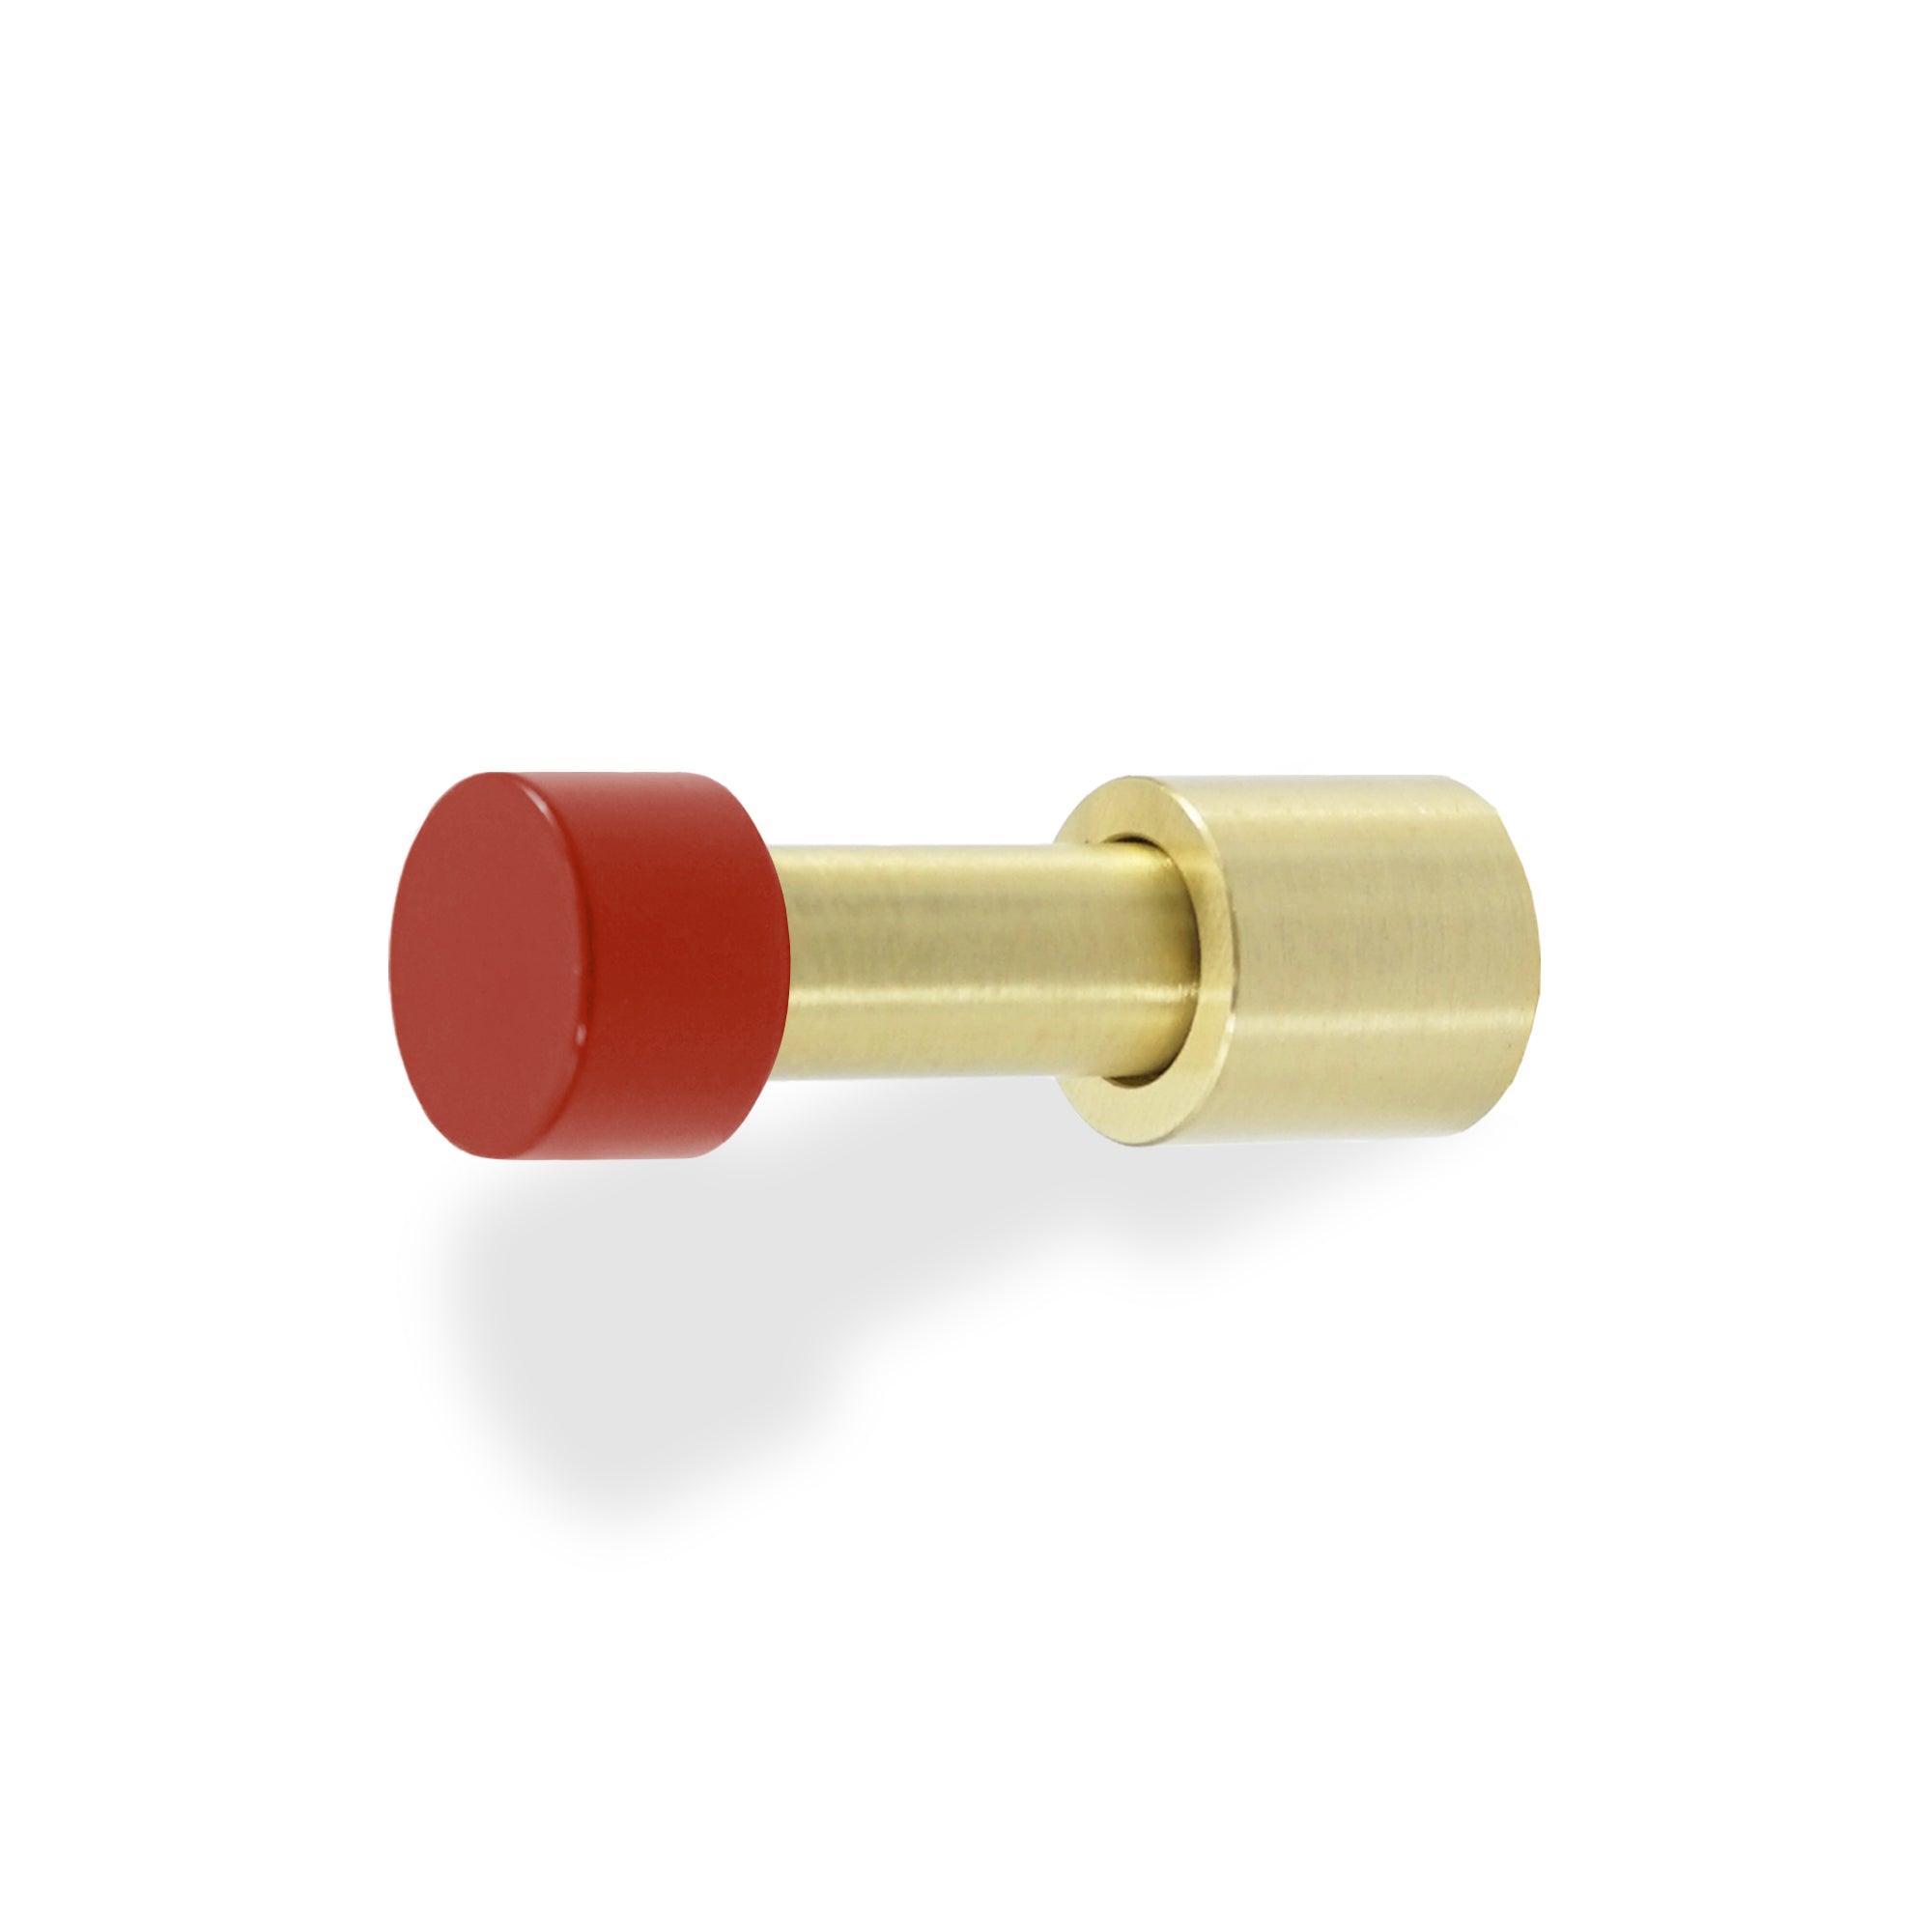 Brass and riding hood red color Stud hook Dutton Brown hardware